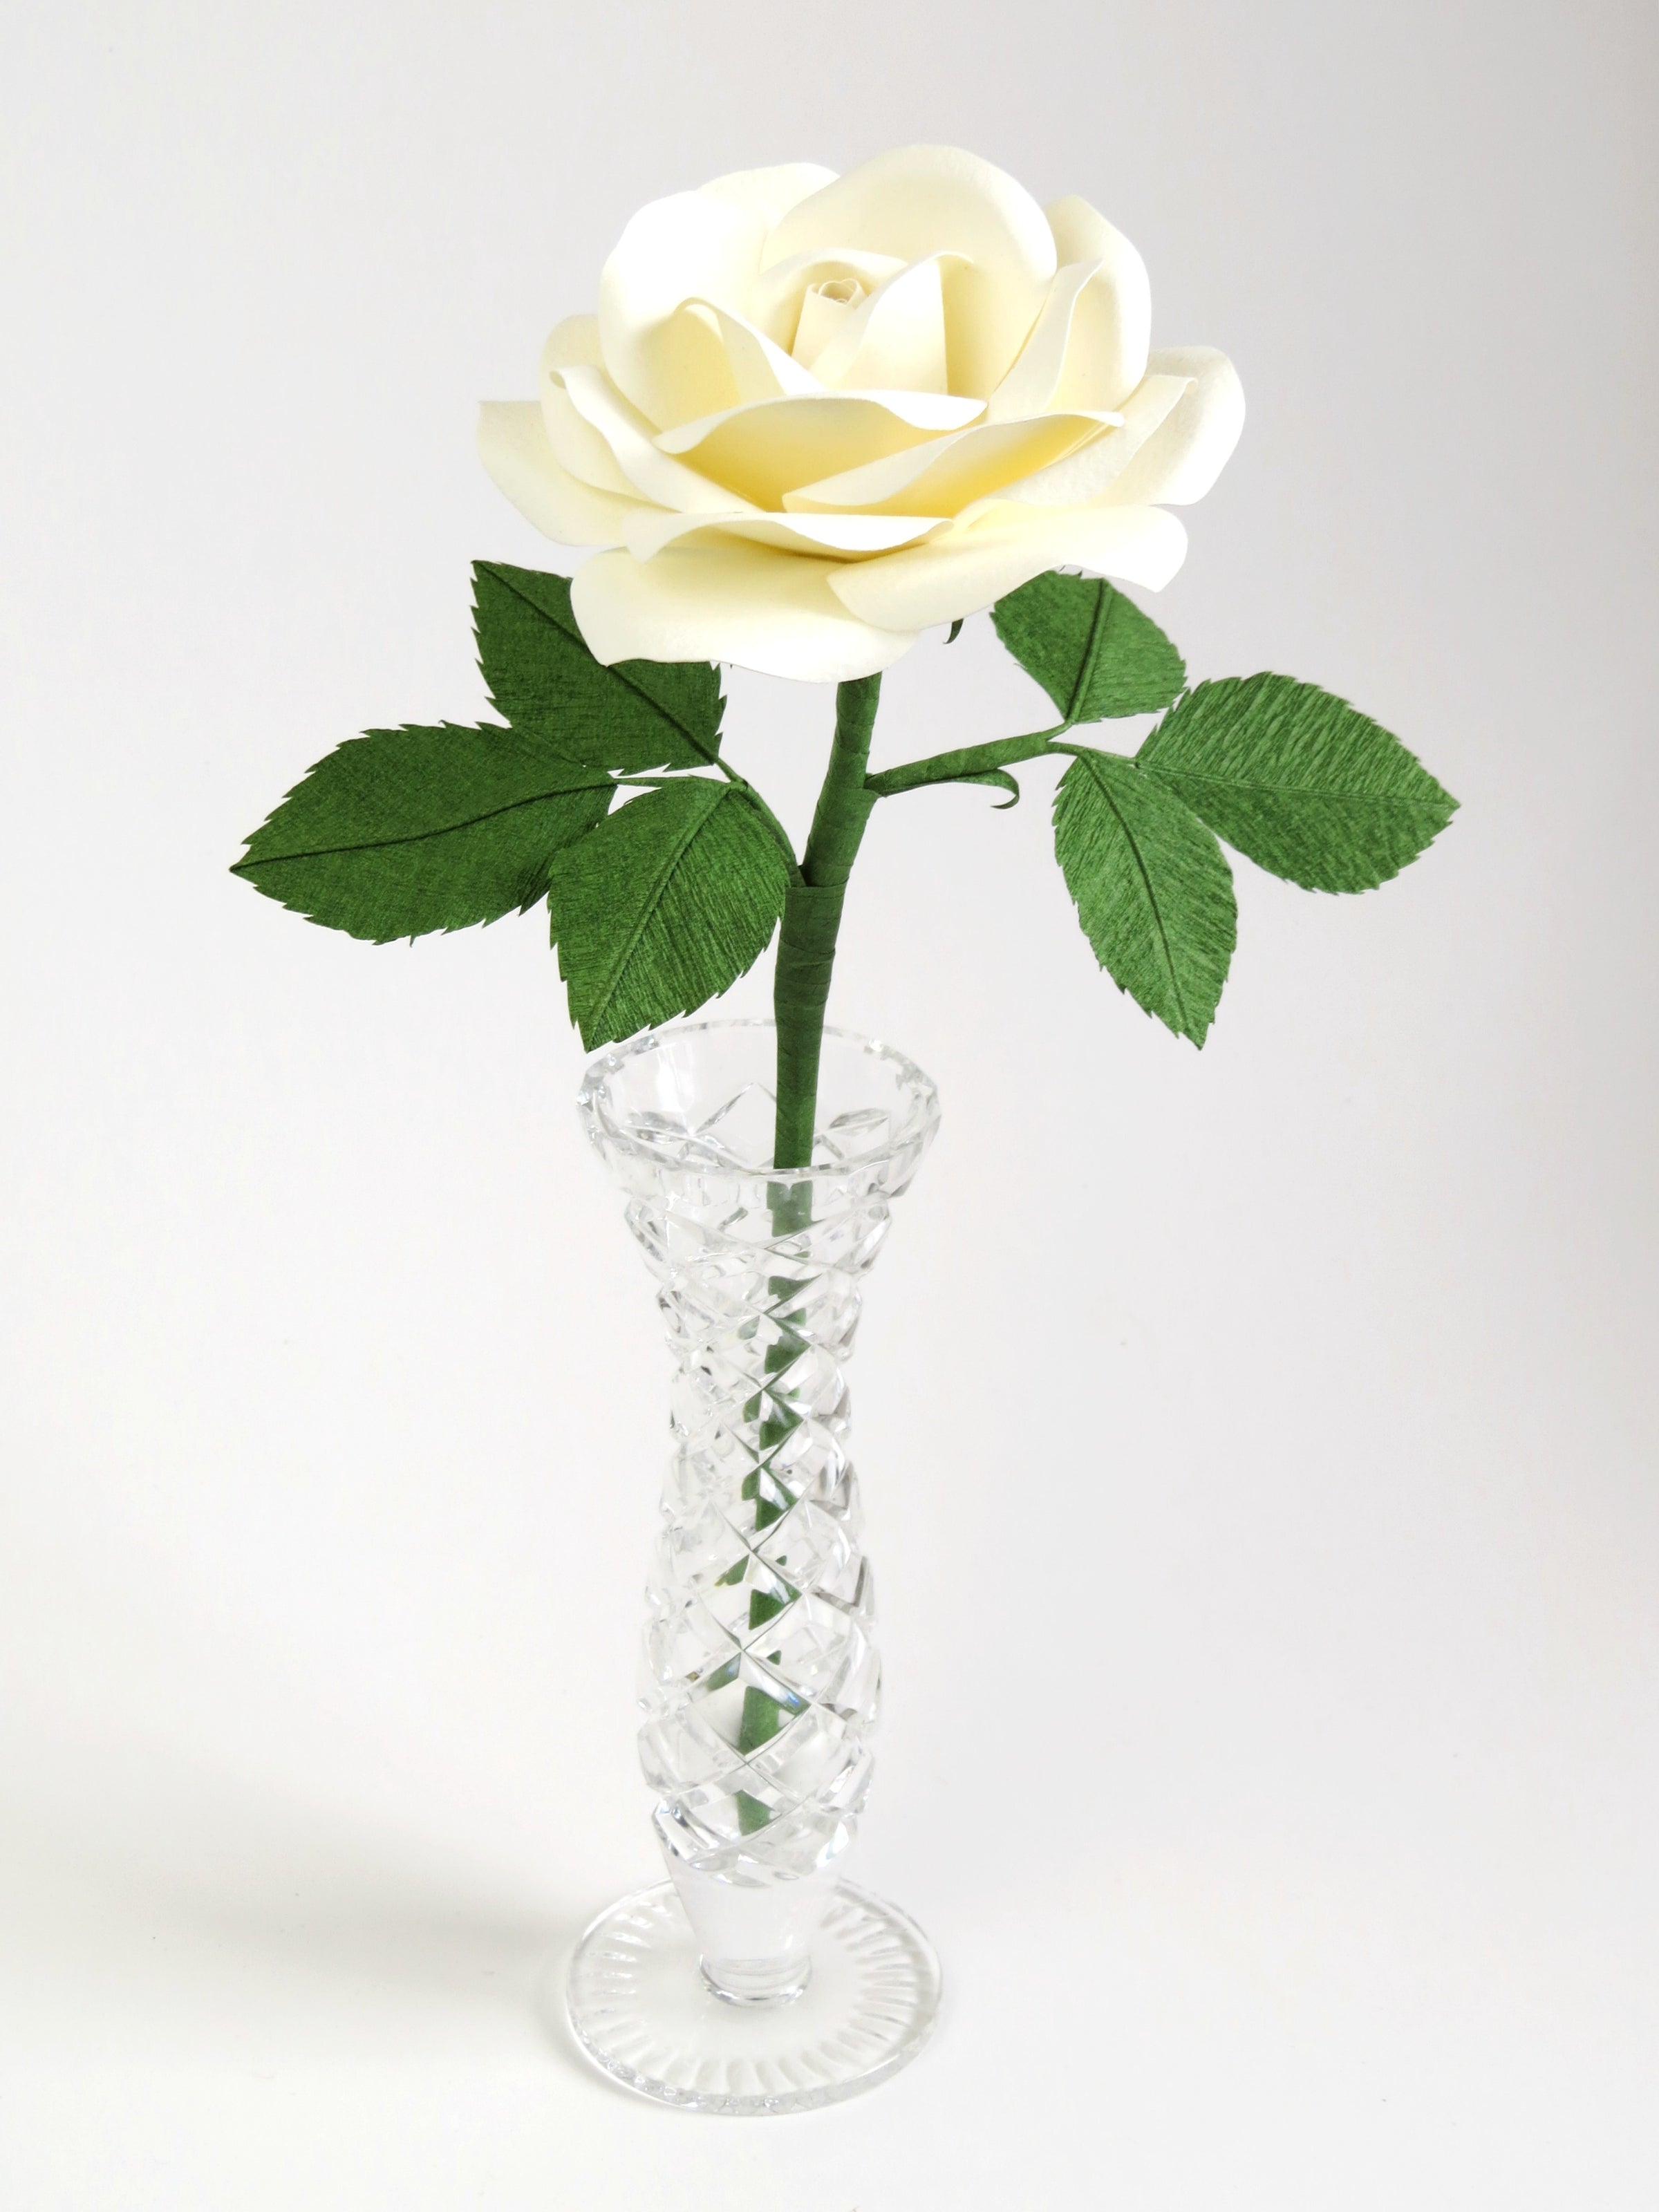 White cotton paper rose with six green leaves standing in a narrow glass vase against a light grey background